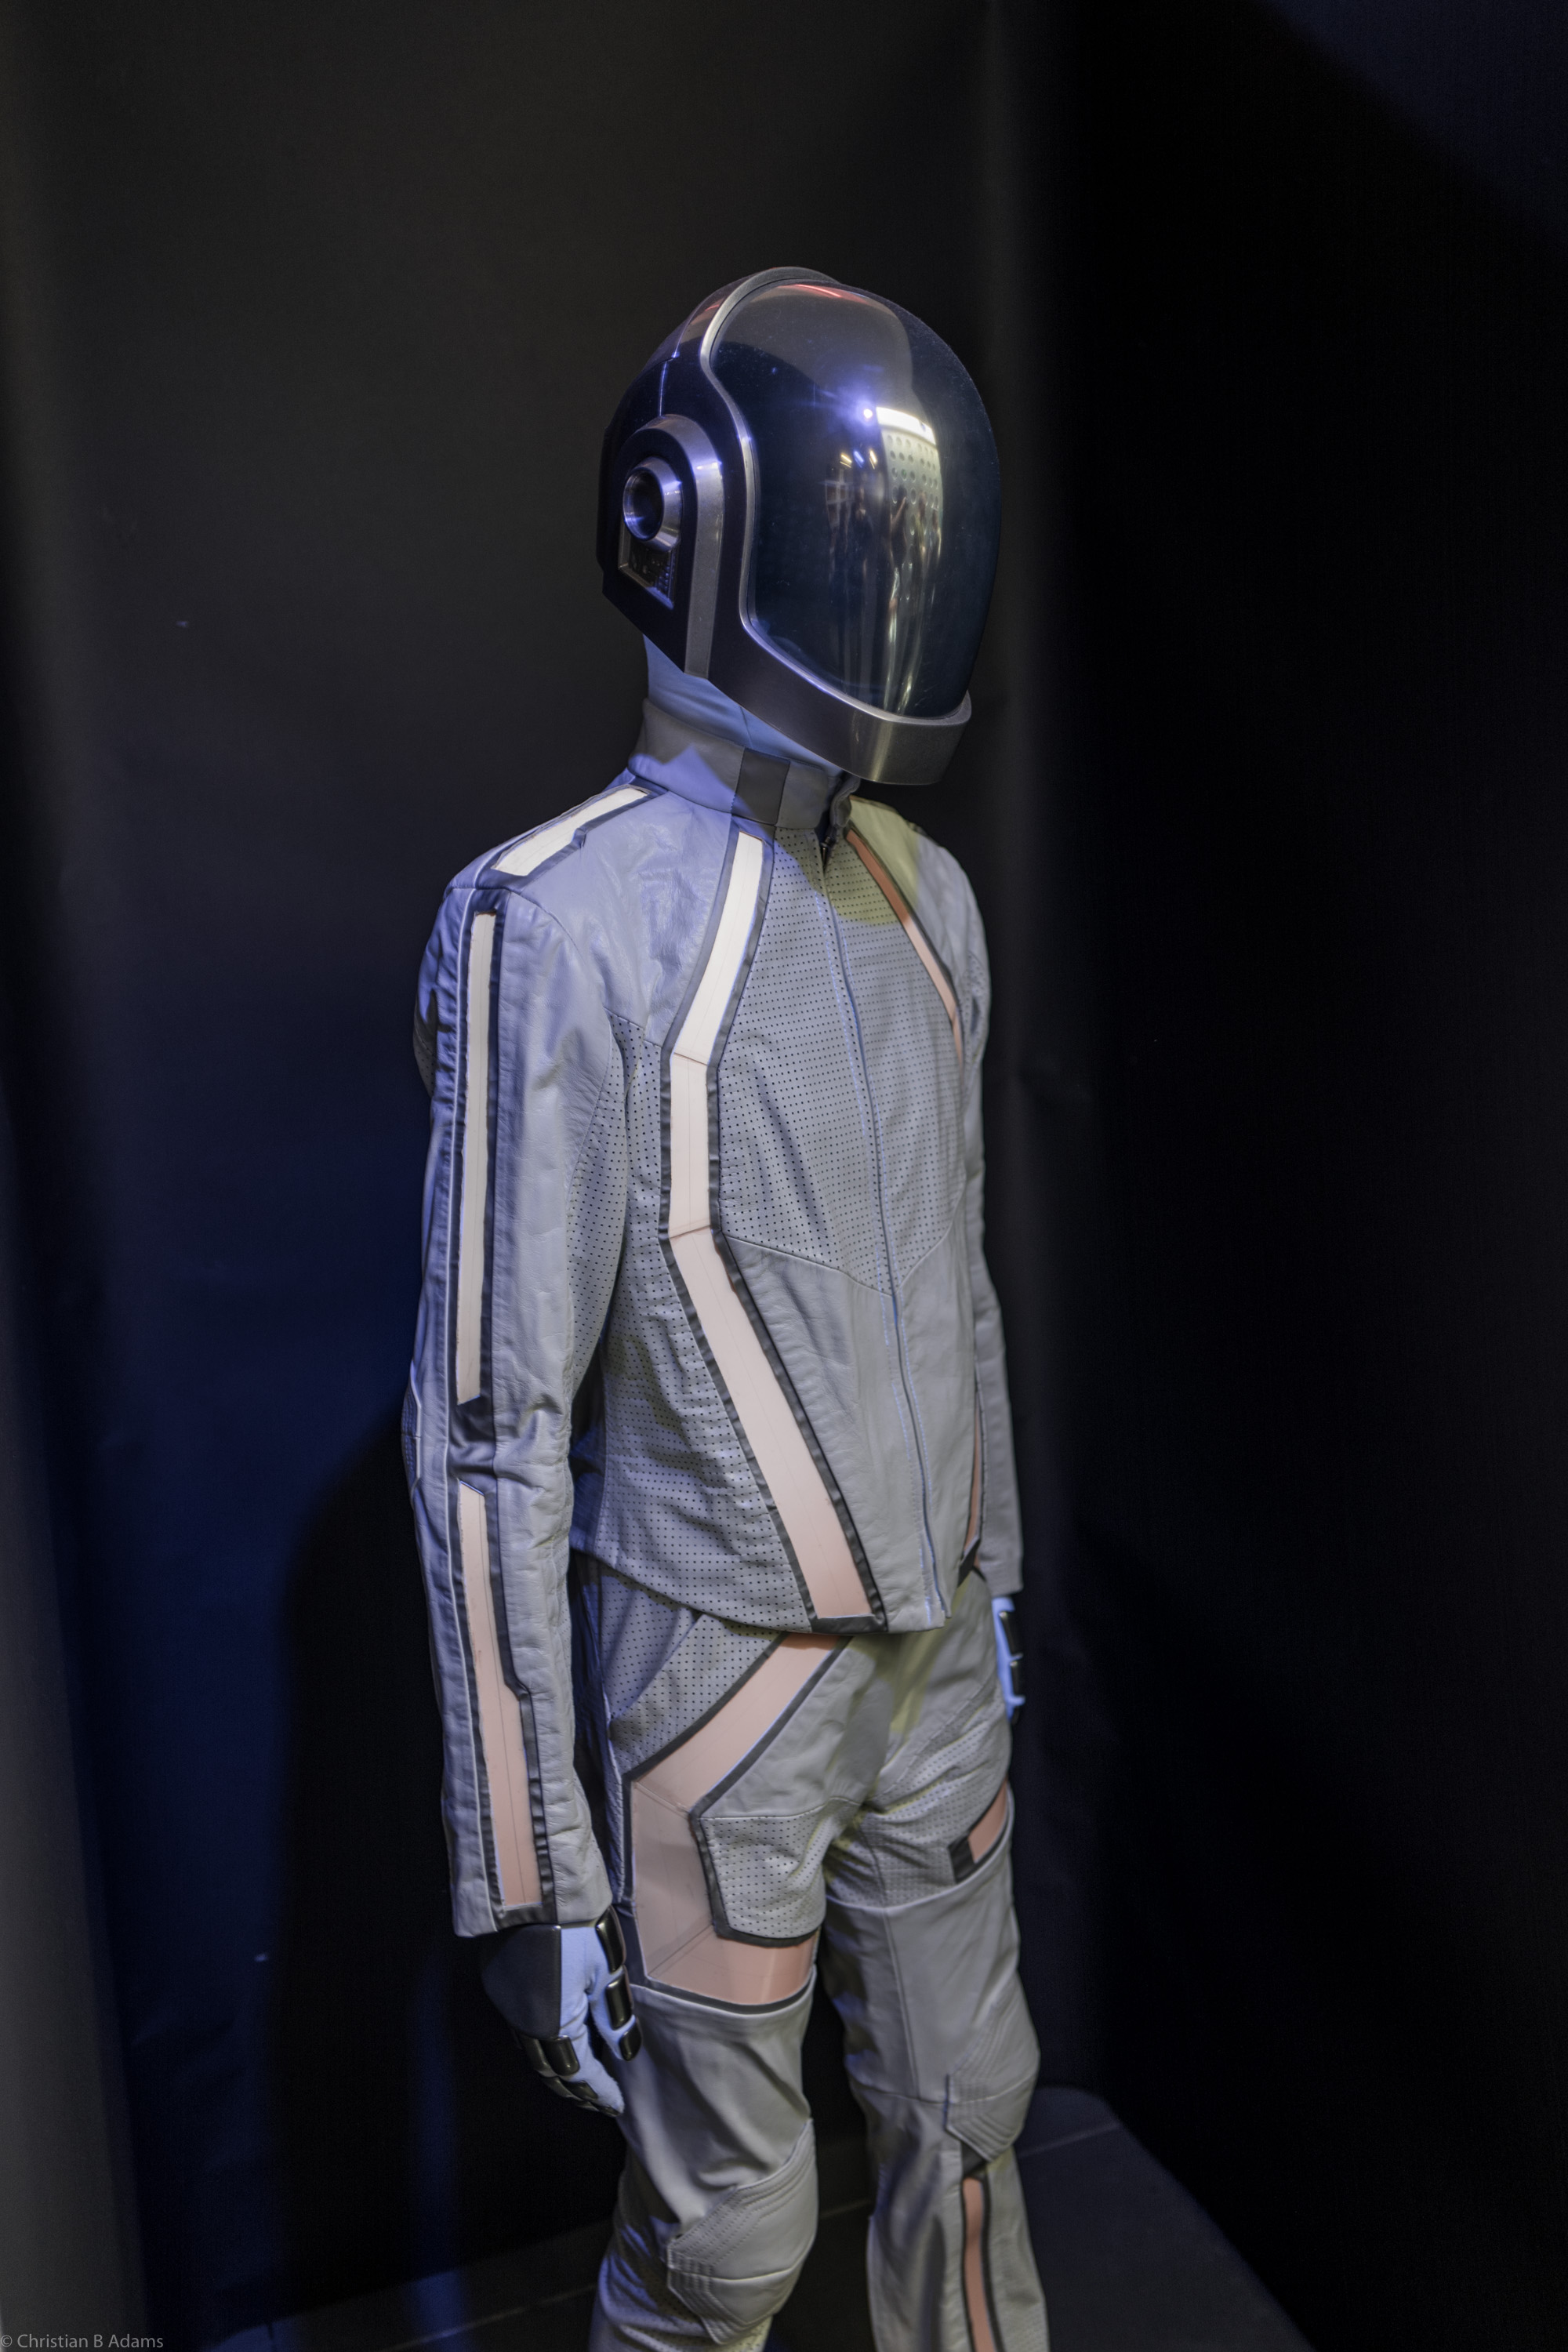 Guy-Manuel de Homem-Christo's Tron: Legacy cameo robot costume at the Daft Punk Pop Up at Maxfield Gallery Los Angeles in February of 2017.